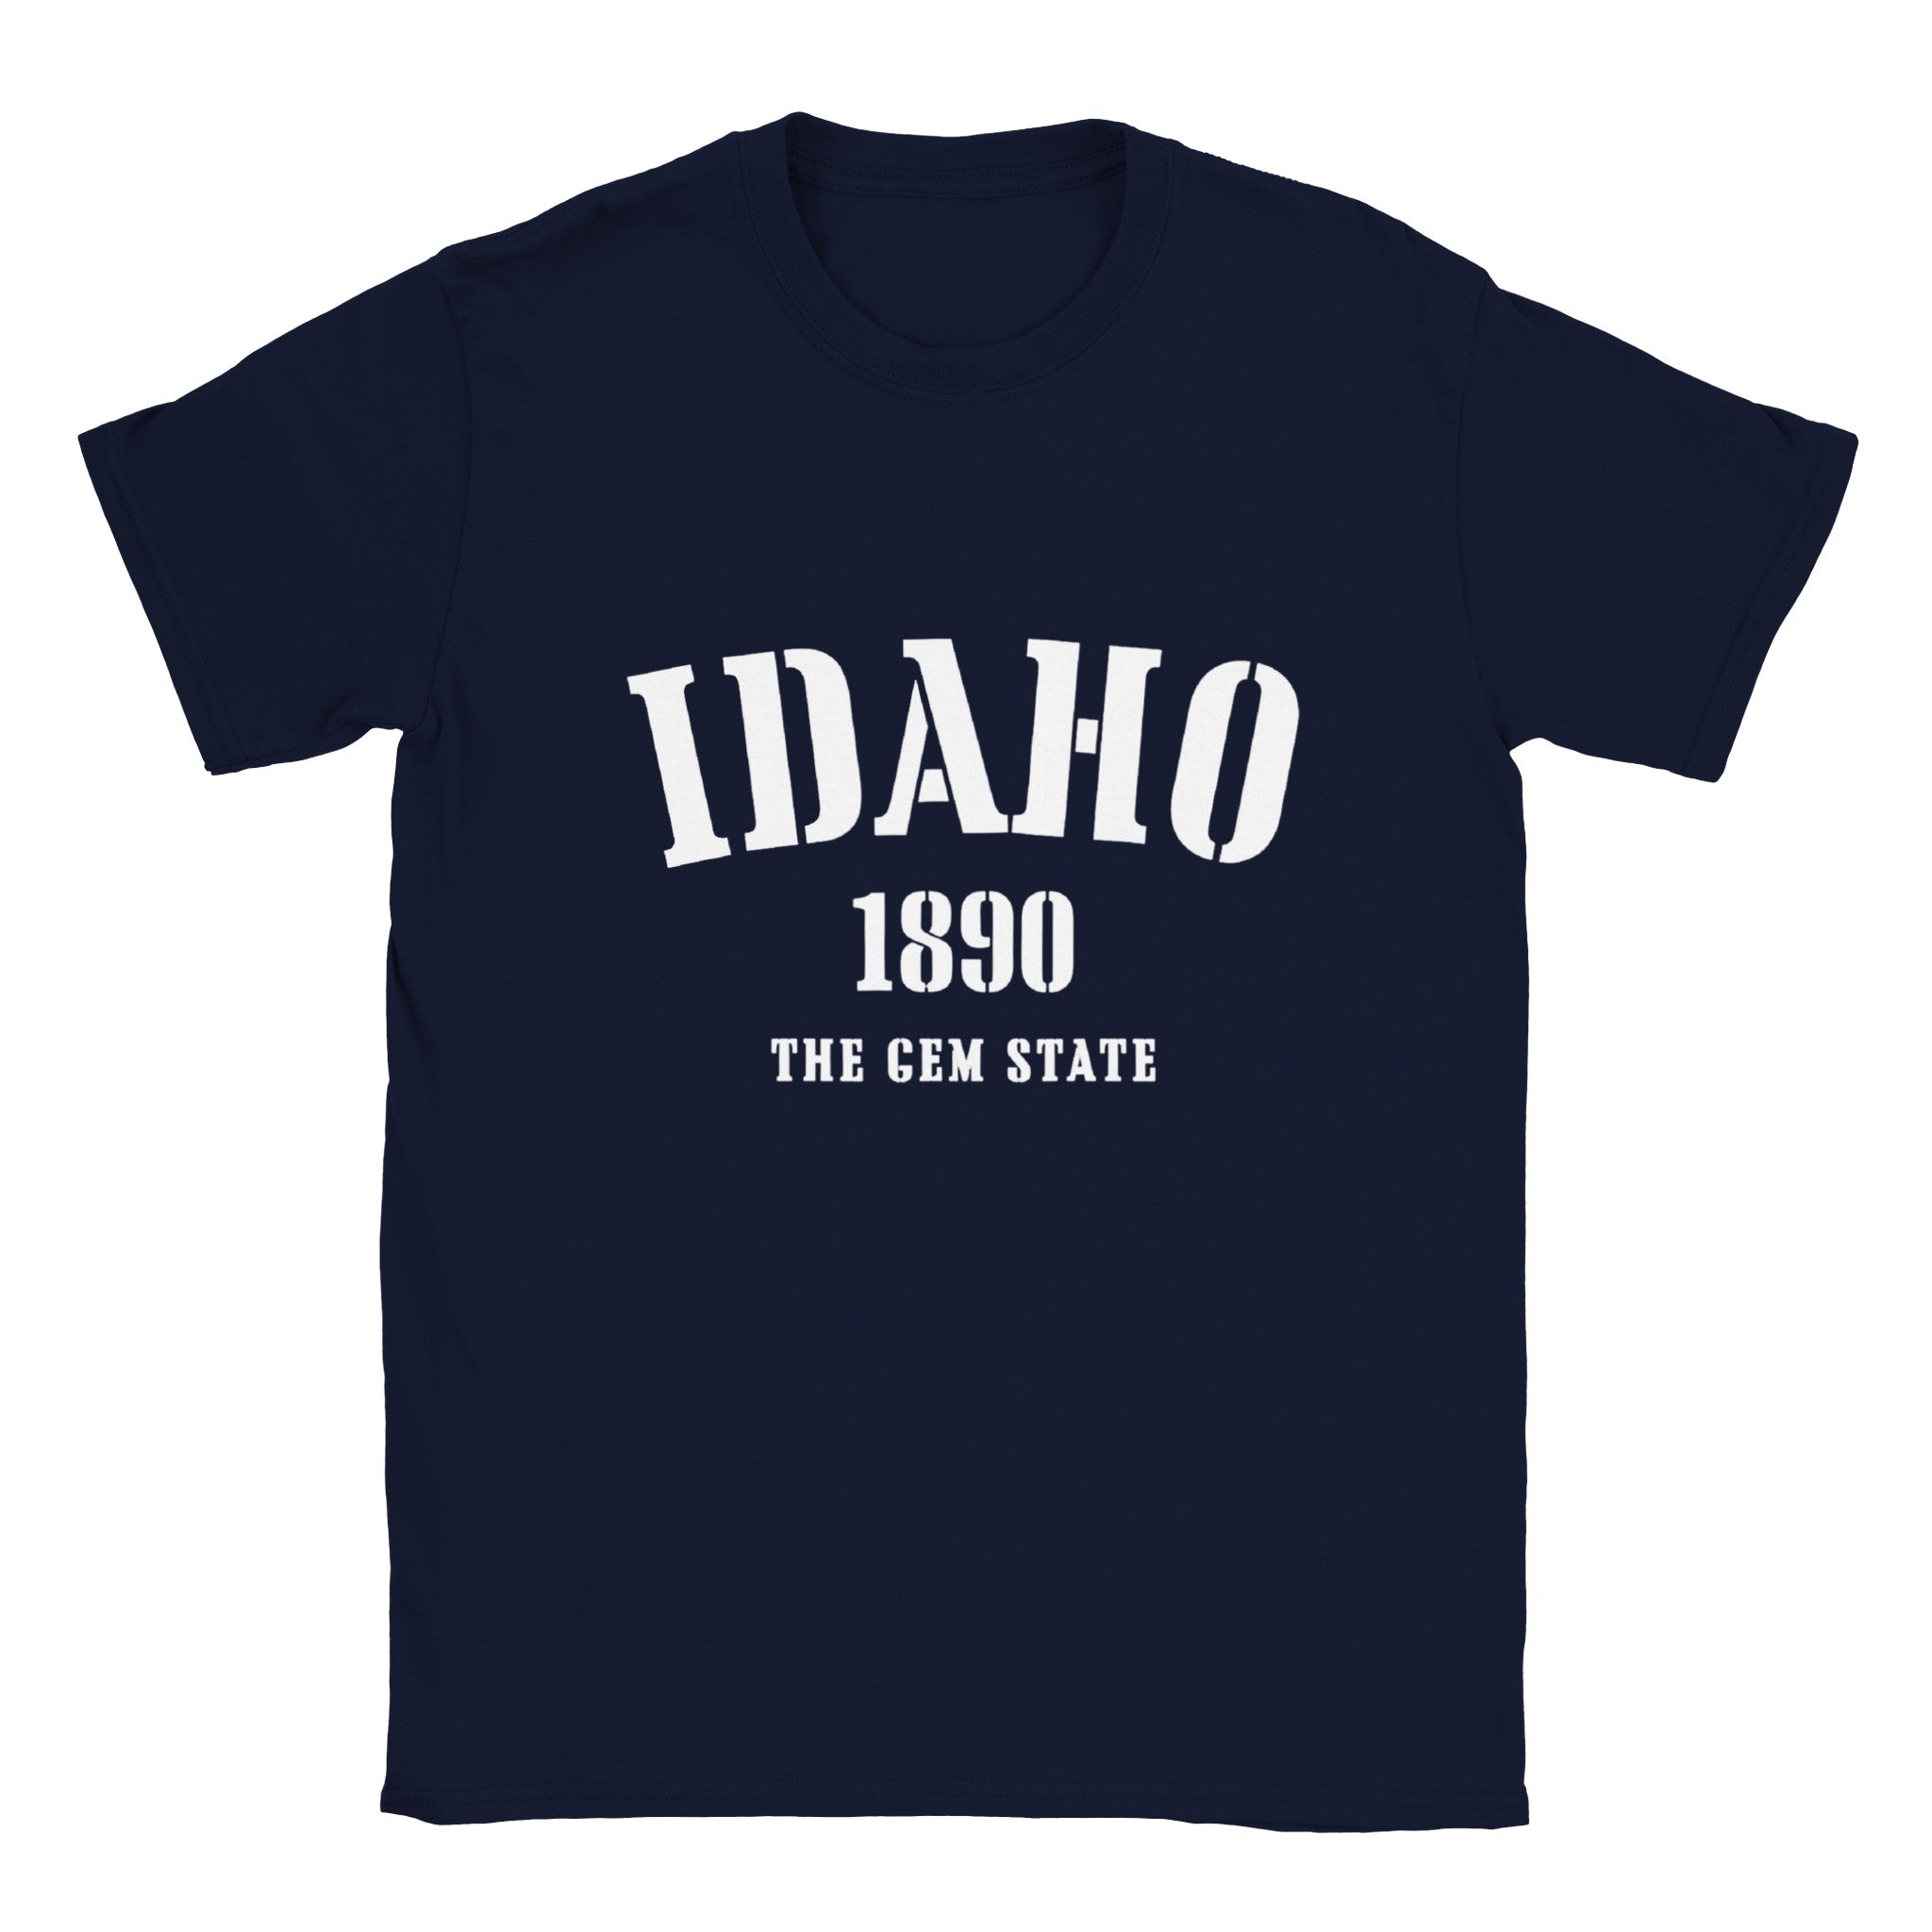 Idaho- Classic Unisex Crewneck States T-shirt - Creations by Chris and Carlos